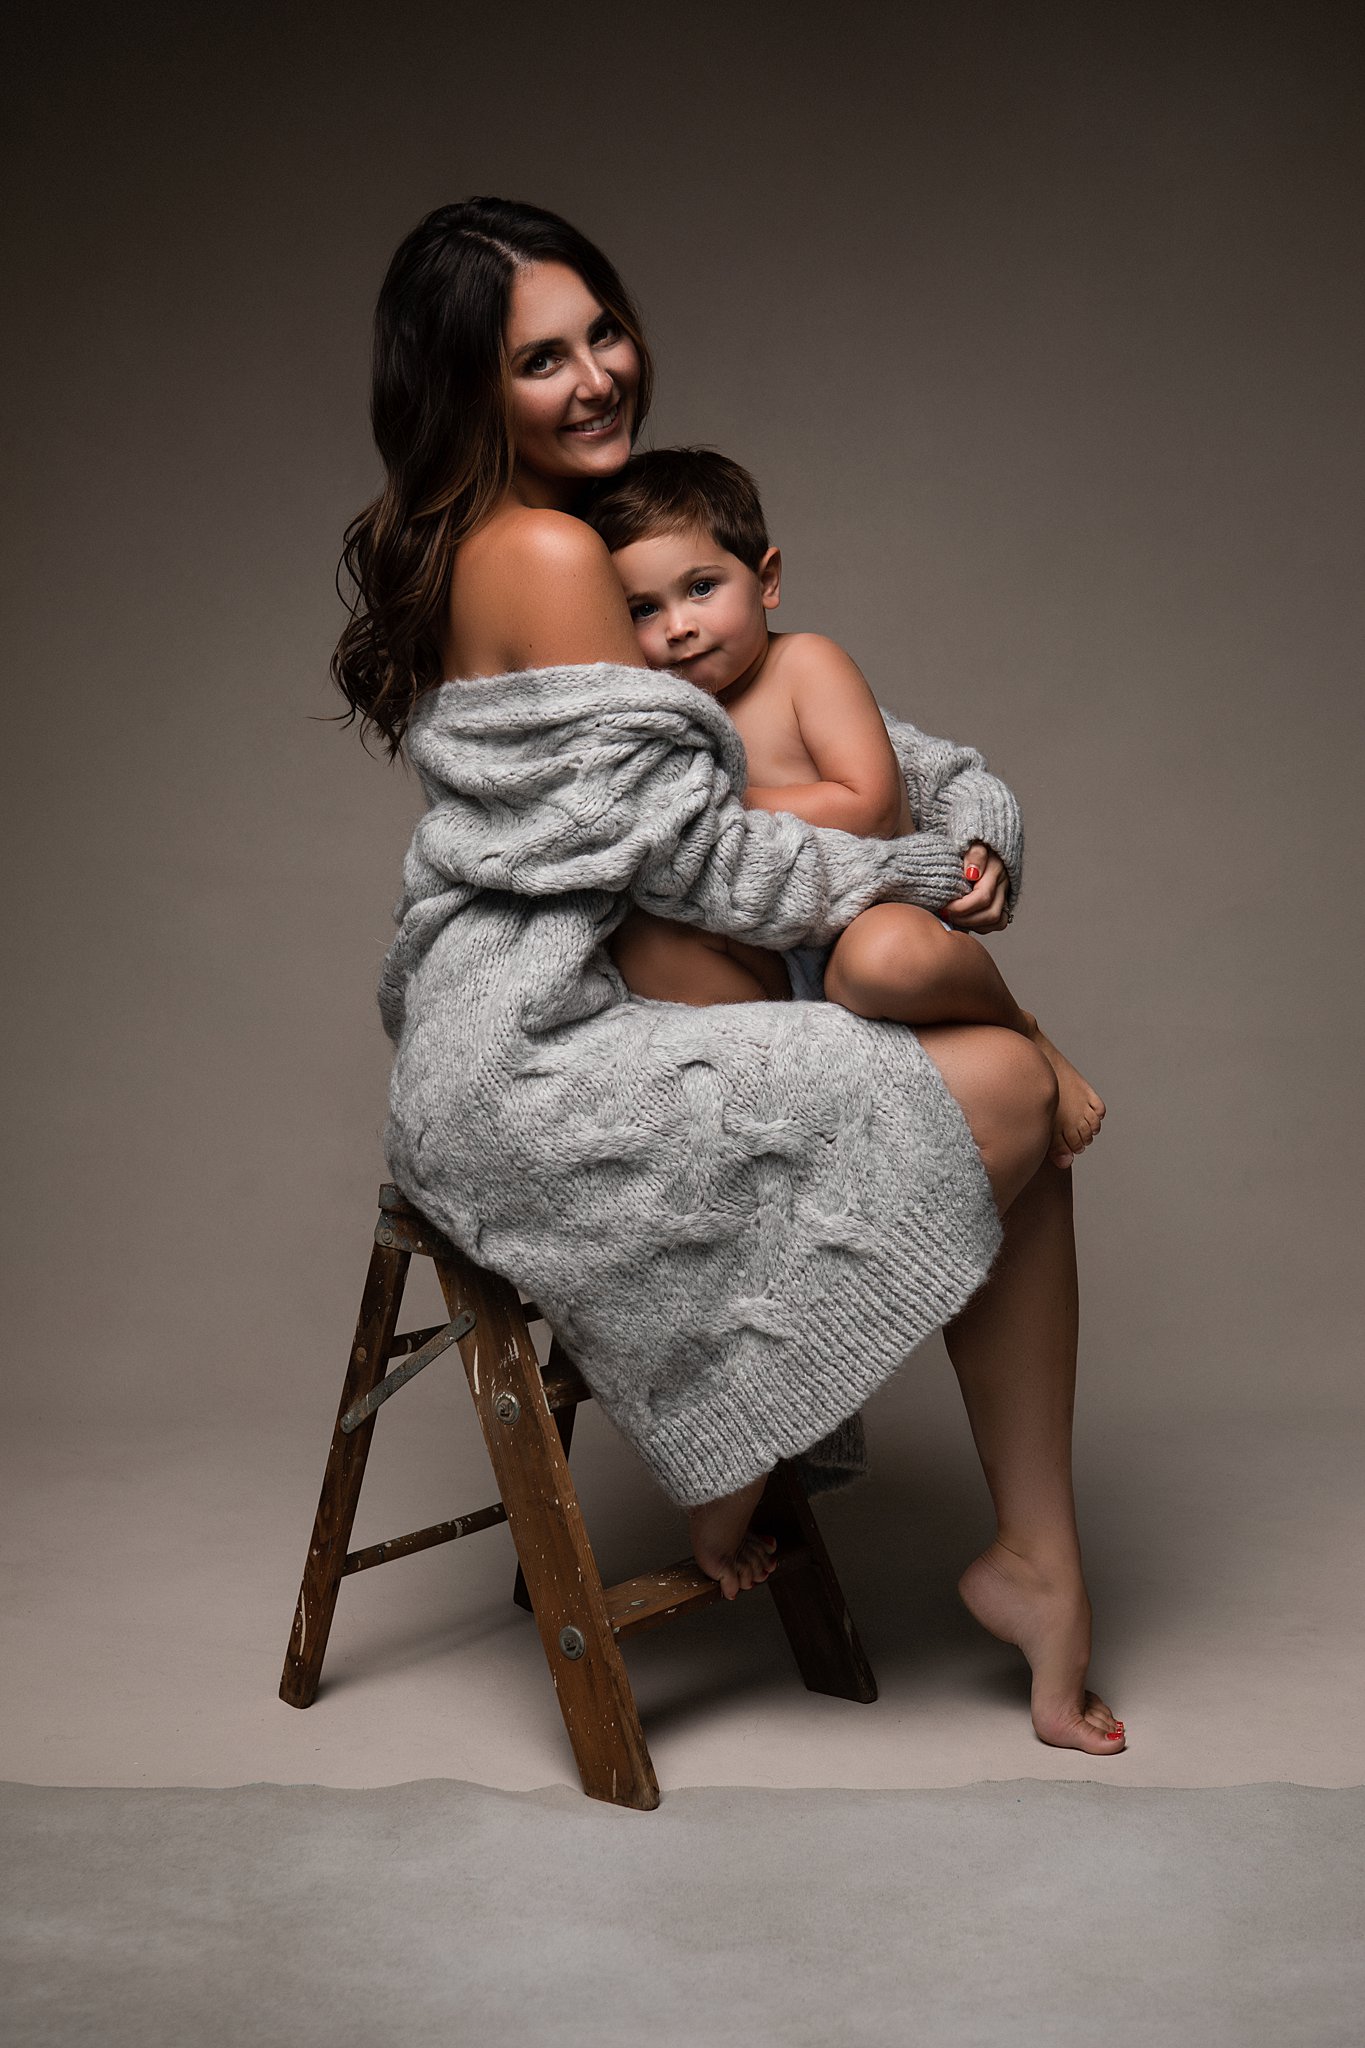 mom and son snuggling on a stool